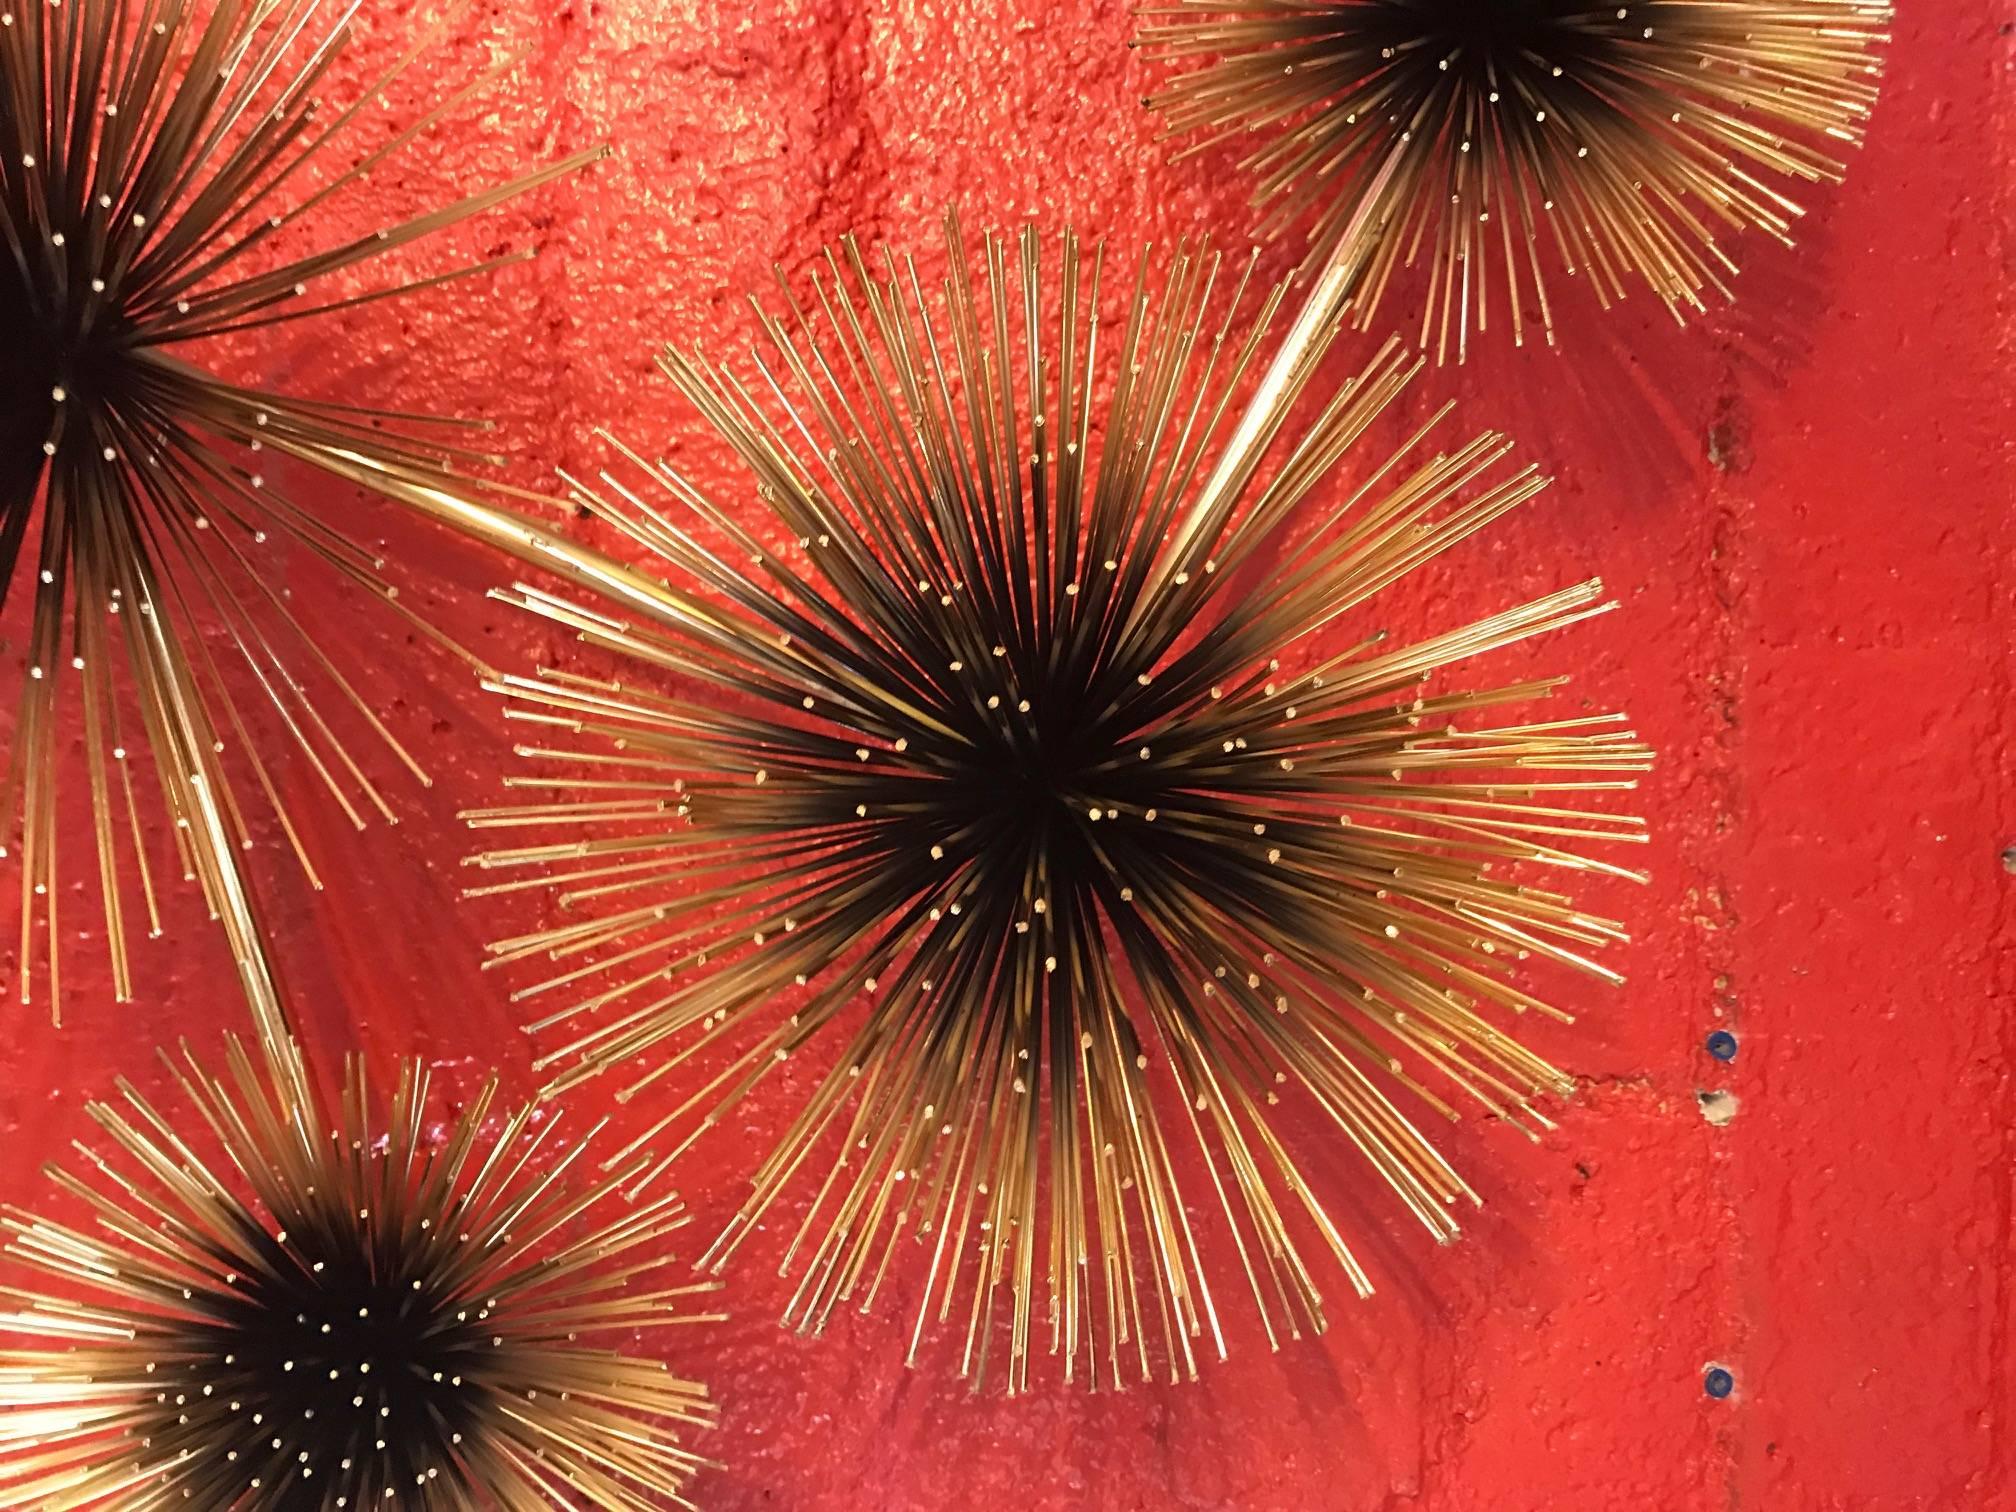 Elegant brass-plated and black painted five urchin or pom pom wall sculpture signed Curtis Jere
Note: Sculpture can hang in horizontal or vertical.